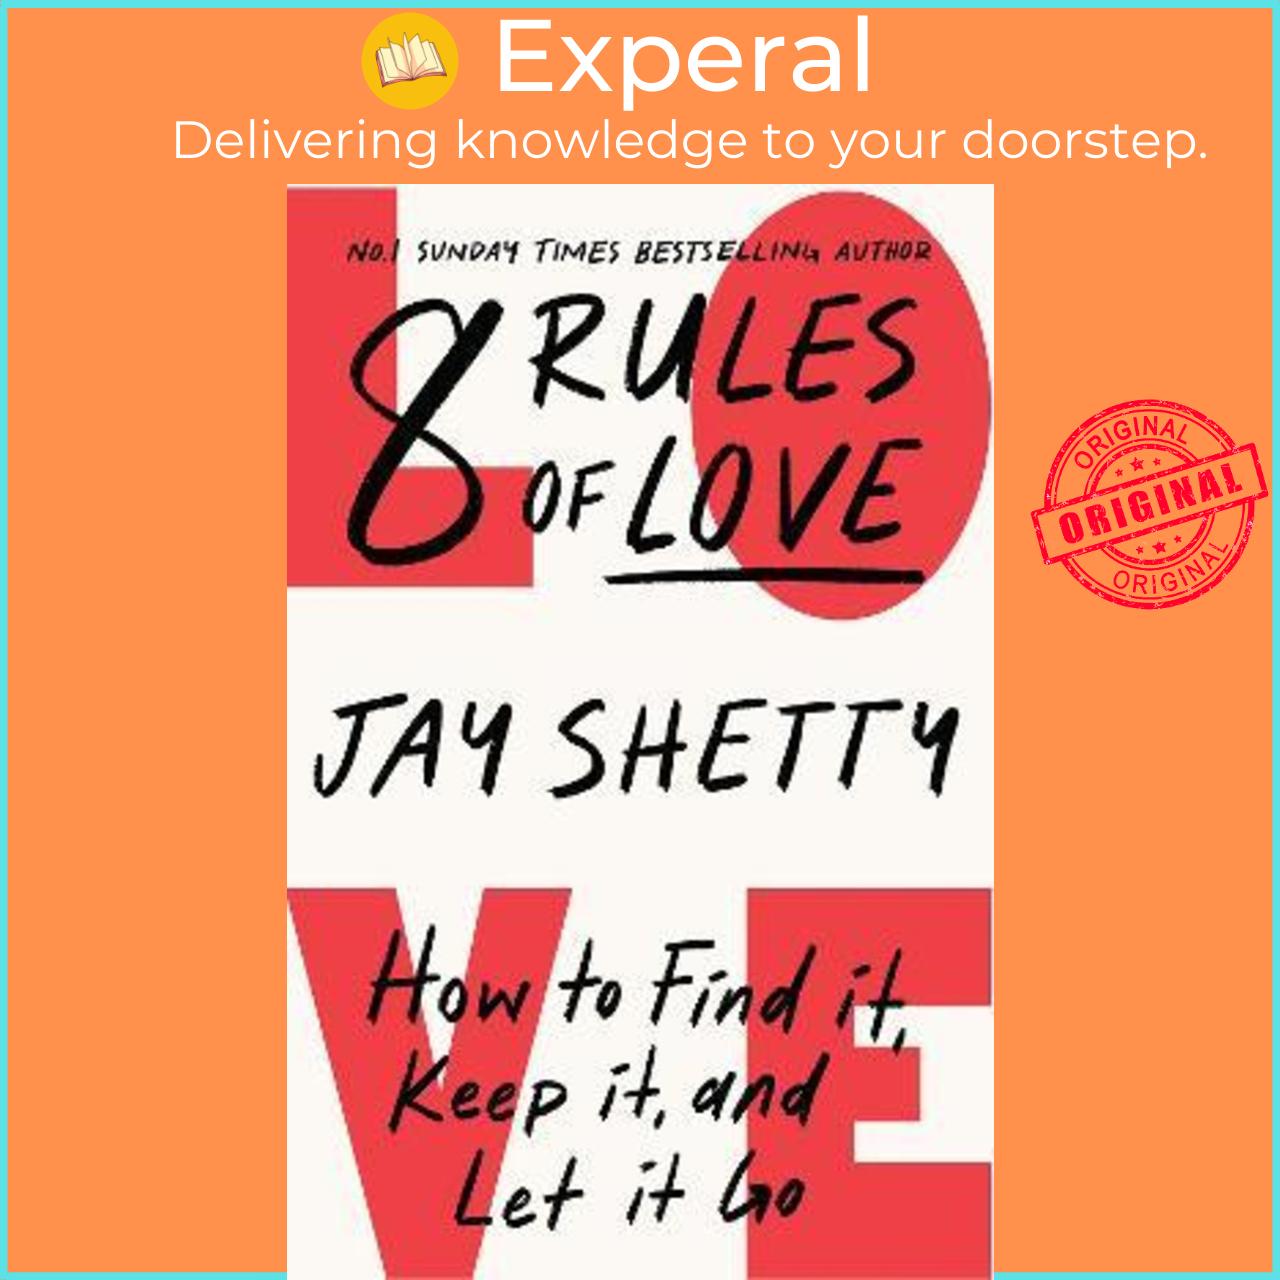 Sách - 8 Rules of Love : How to Find it, Keep it, and Let it Go by Jay Shetty (UK edition, hardcover)